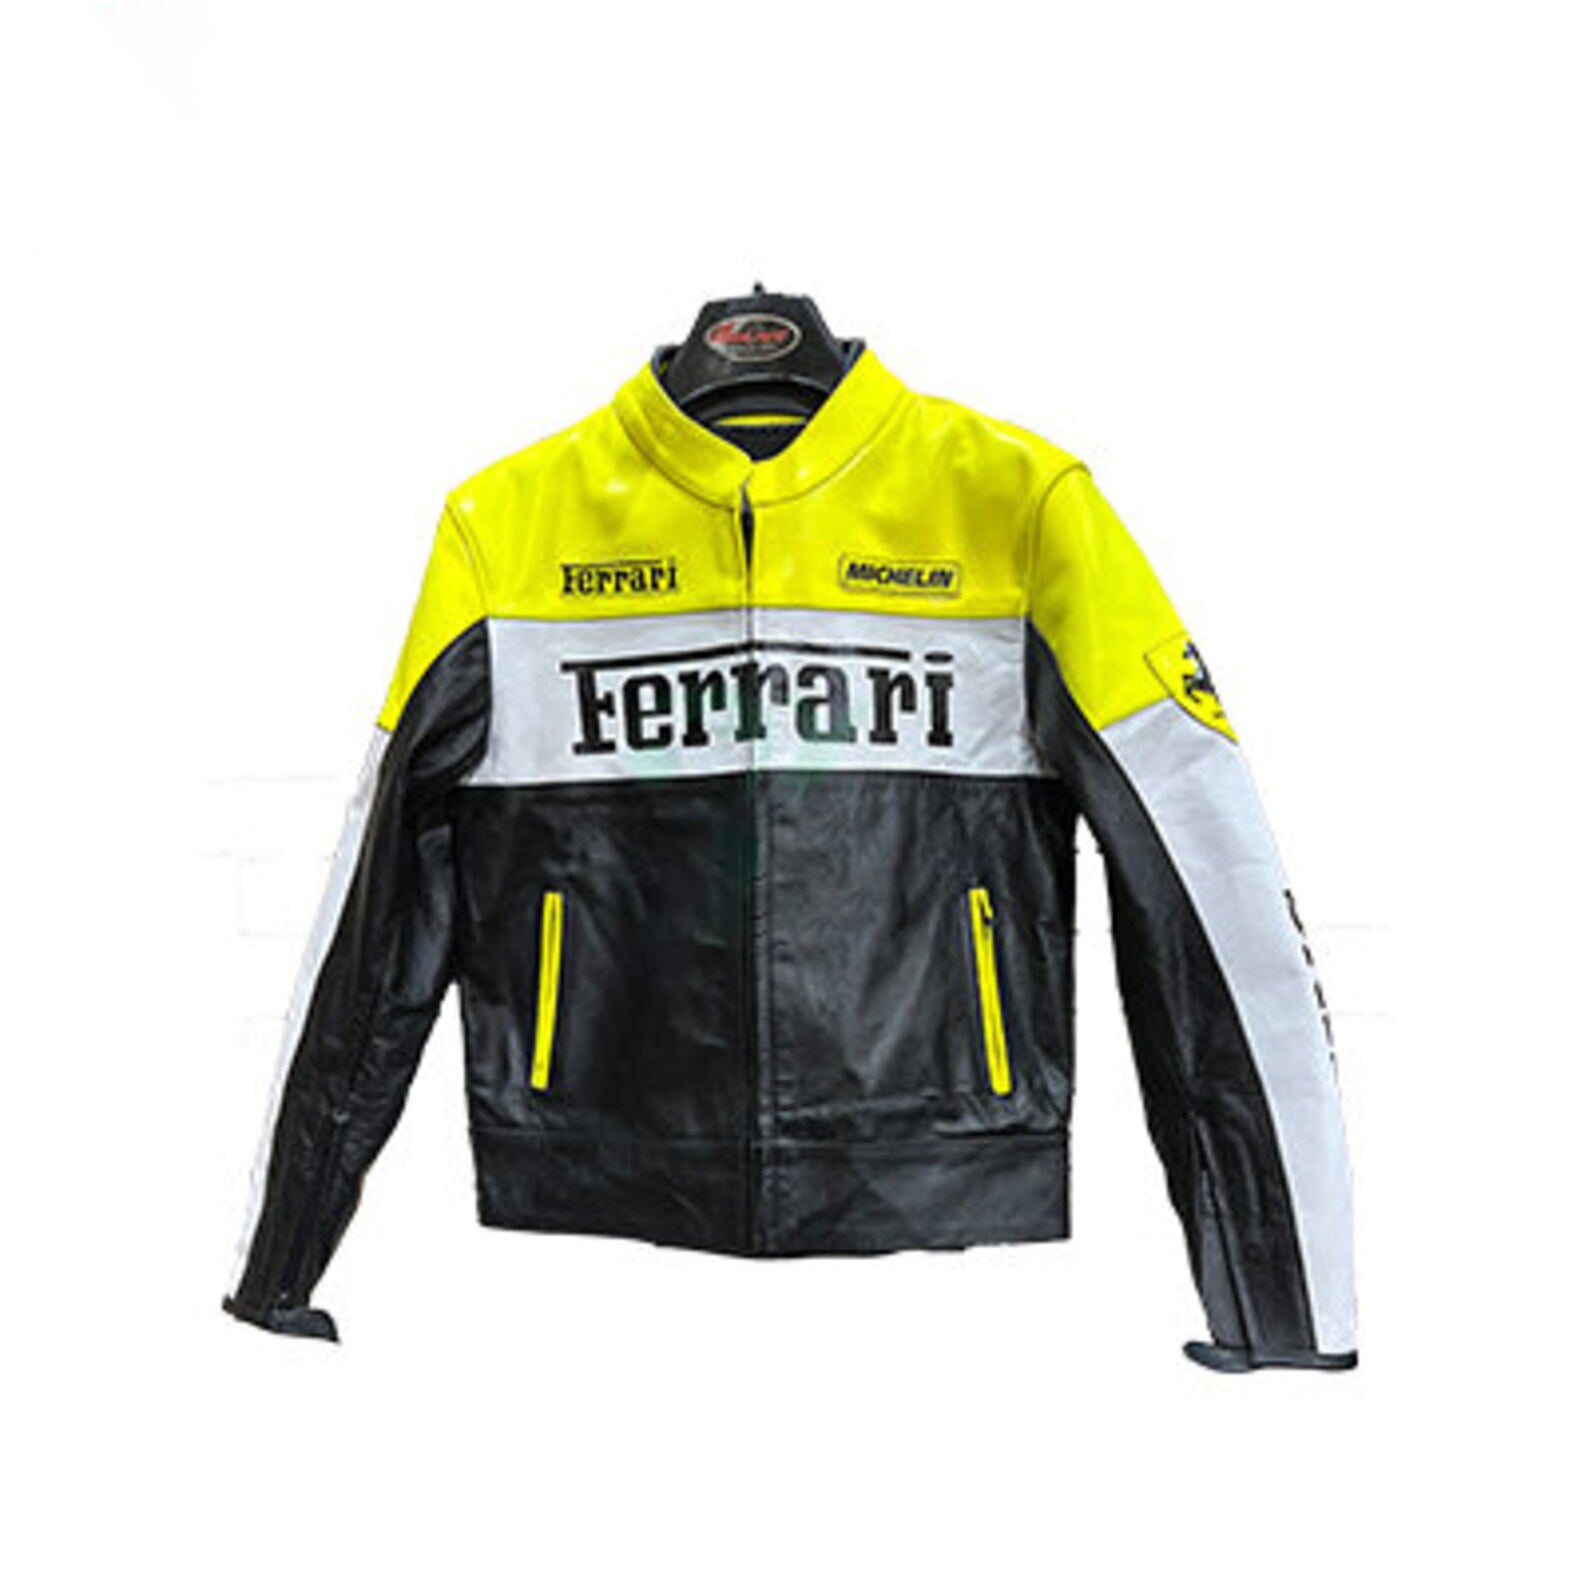 Motorbike Leather Jacket Premium Handcrafted Durable, Age-Perfecting Design for the Bold Adventurer-Model 05